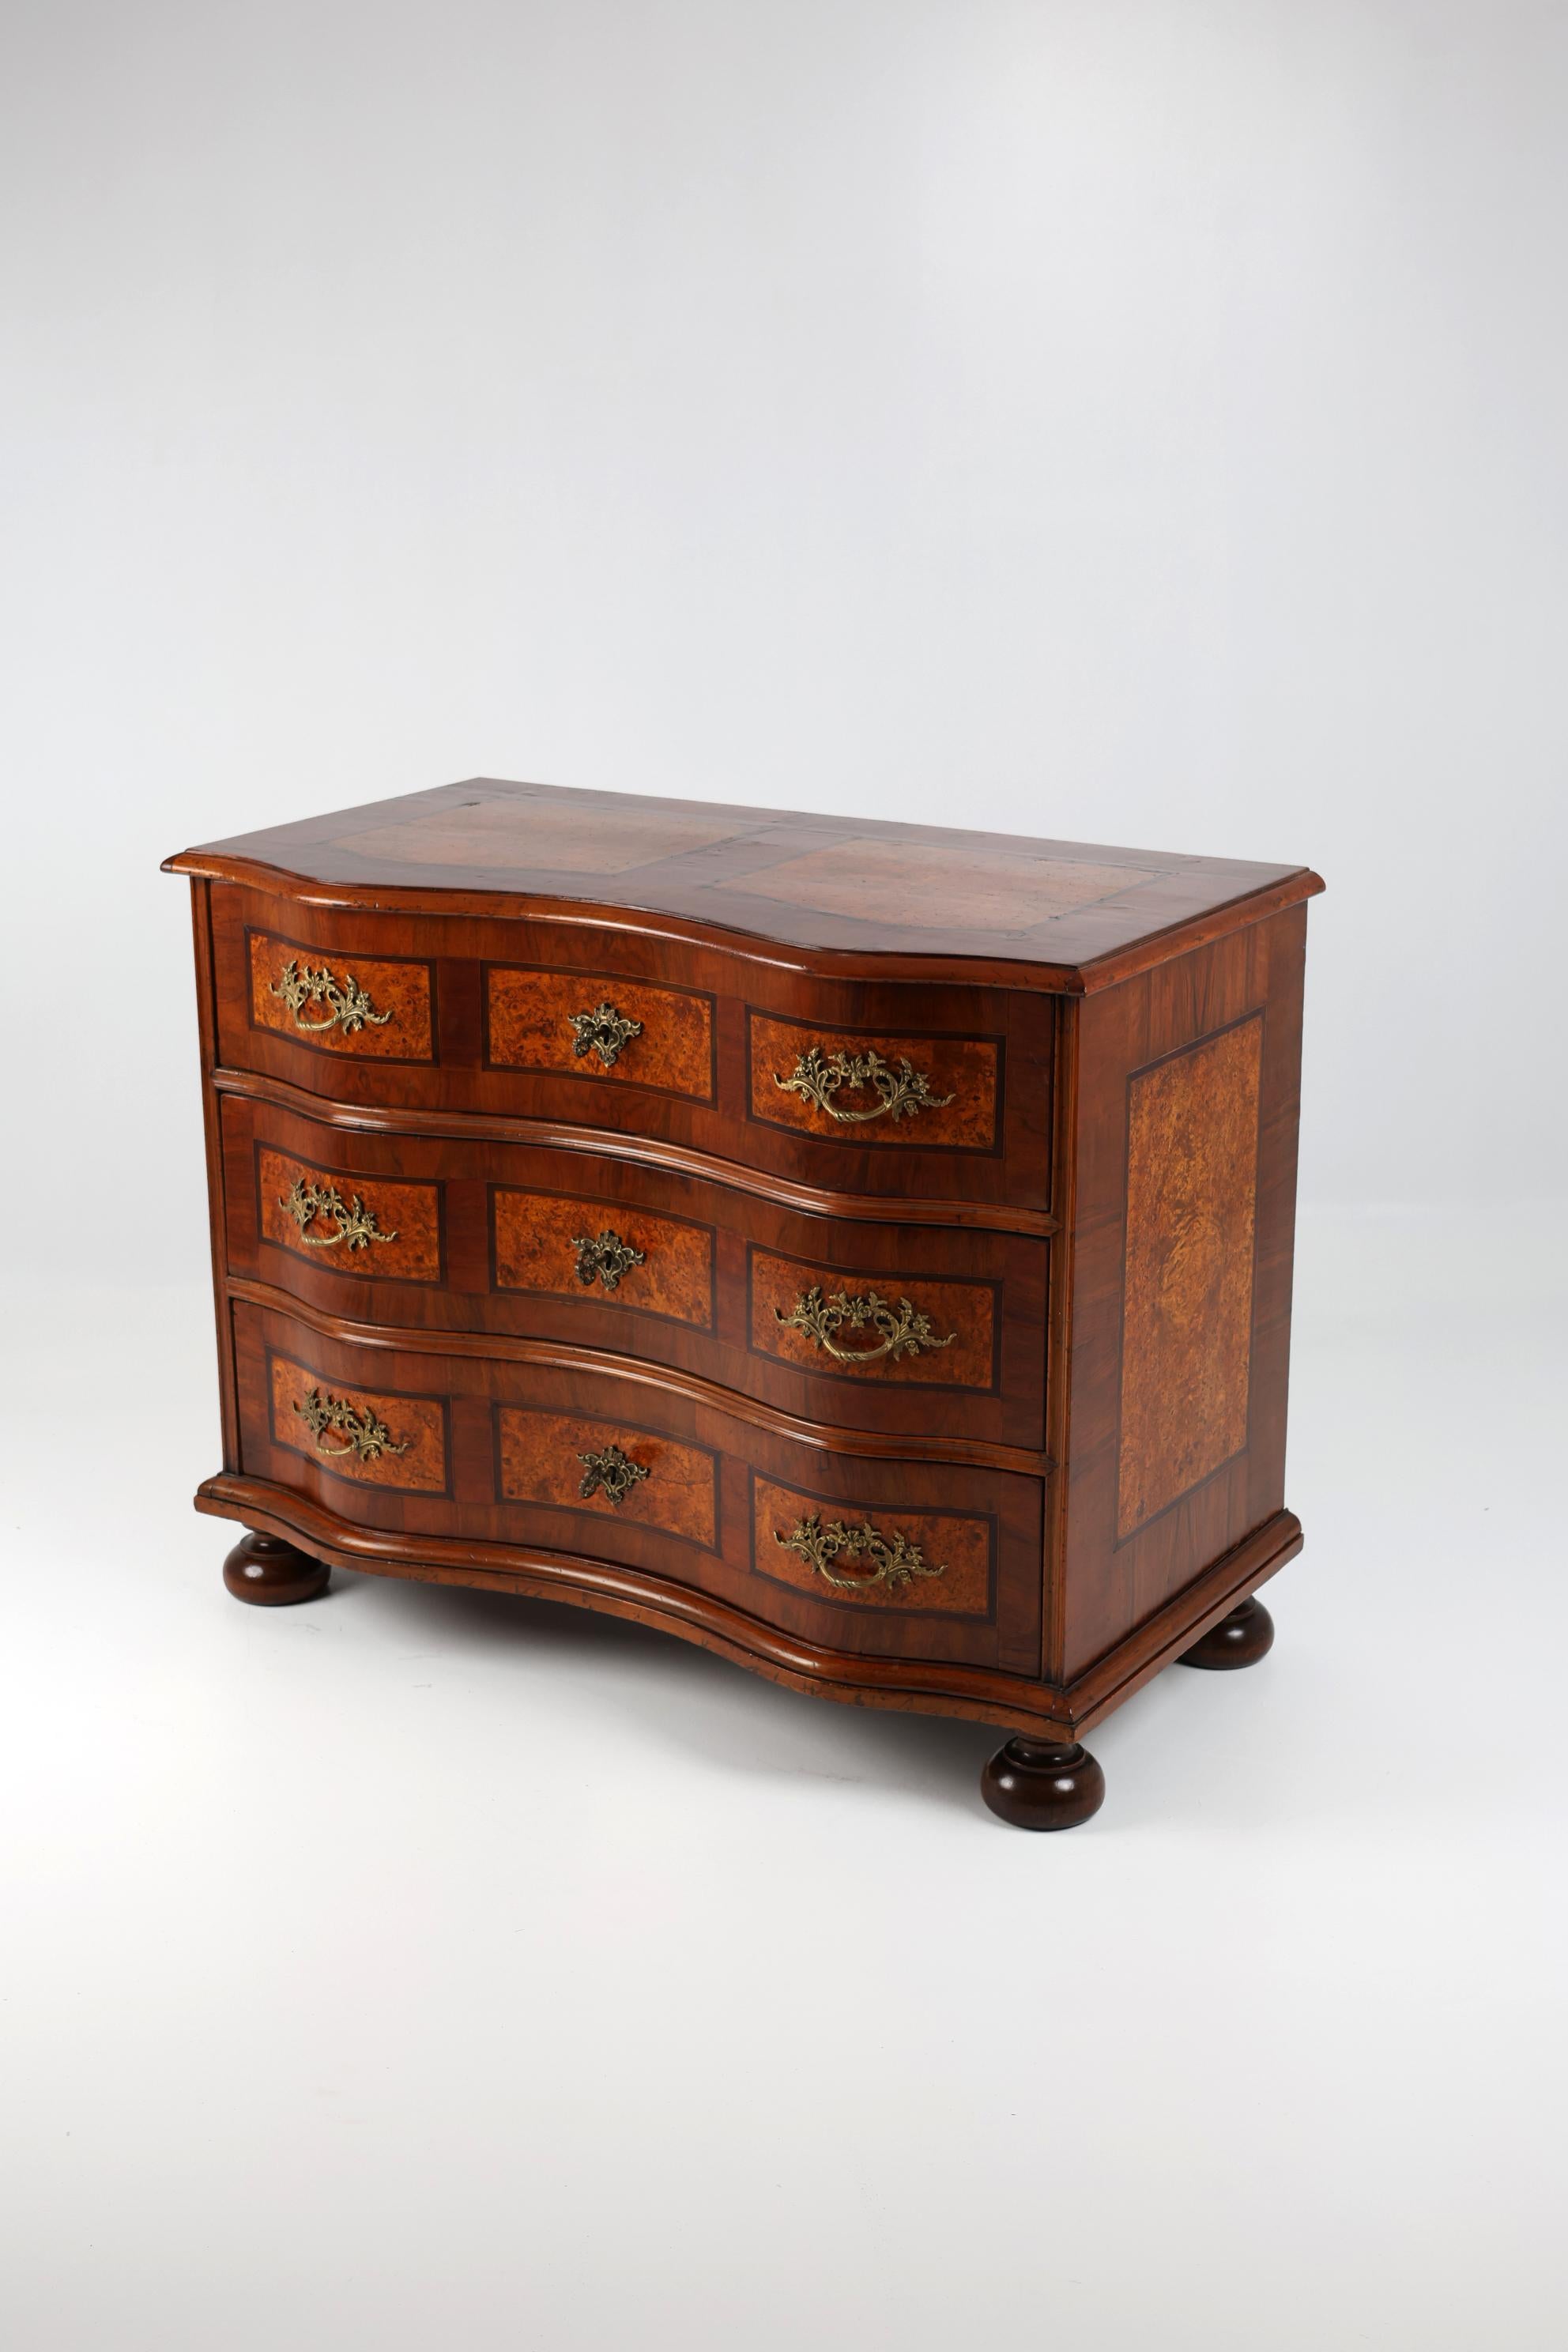 19th Century Baroque Chest of Drawers with Burl wood In Good Condition For Sale In Stahnsdorf, DE